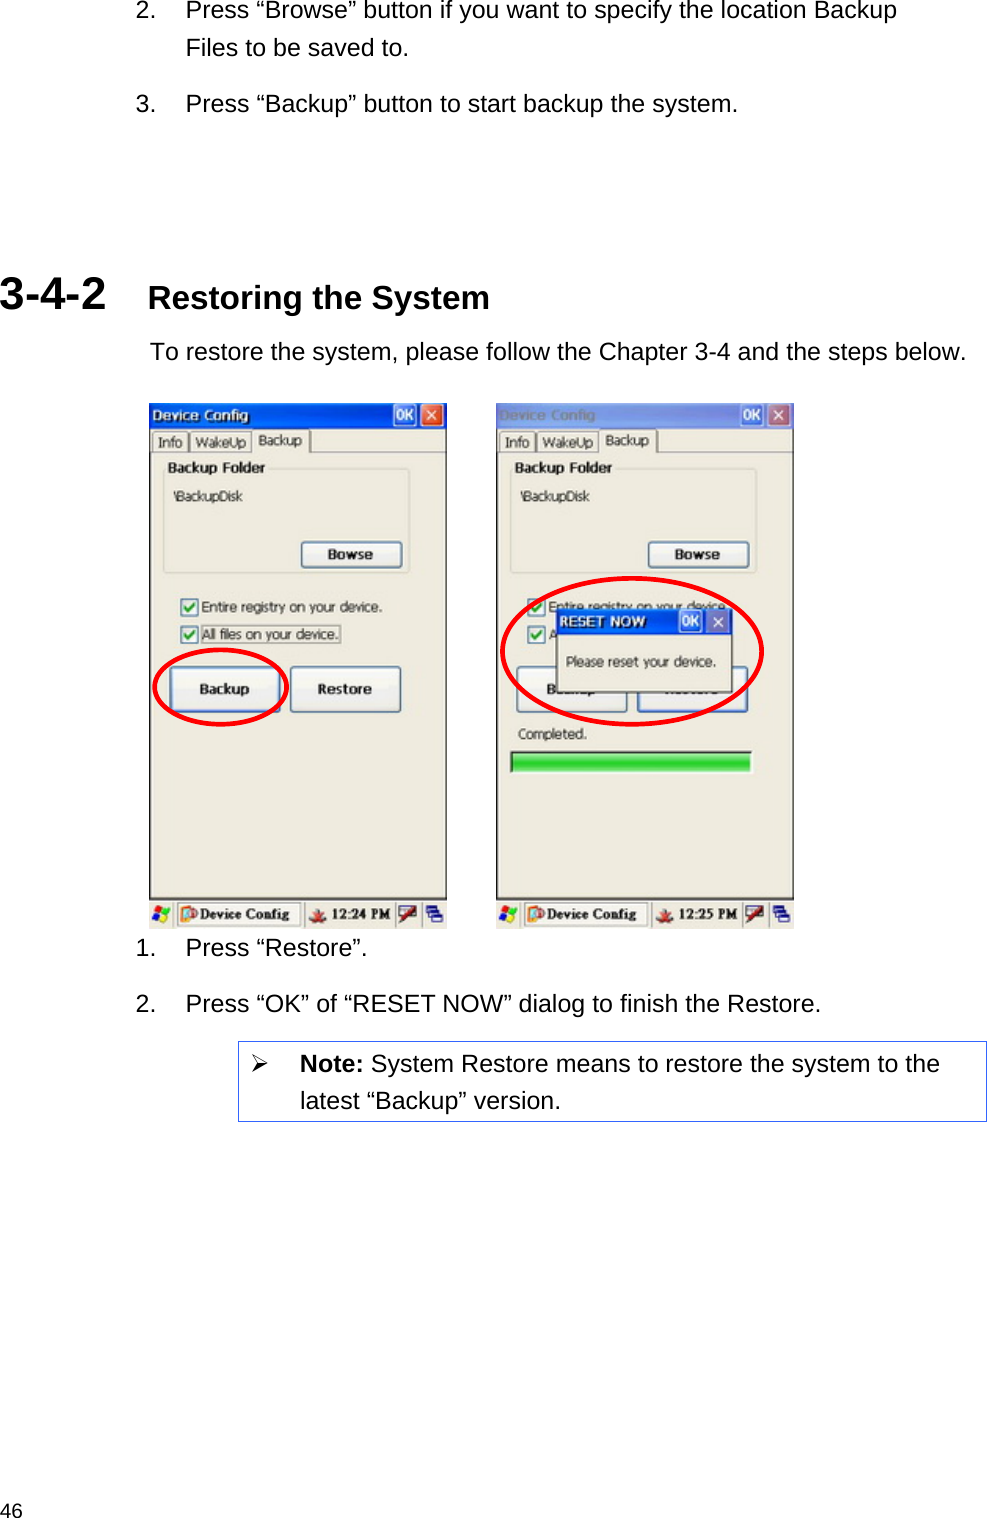  462.  Press “Browse” button if you want to specify the location Backup Files to be saved to. 3.  Press “Backup” button to start backup the system.    3-4-2  Restoring the System To restore the system, please follow the Chapter 3-4 and the steps below.          1. Press “Restore”. 2.  Press “OK” of “RESET NOW” dialog to finish the Restore.  Note: System Restore means to restore the system to the latest “Backup” version.     